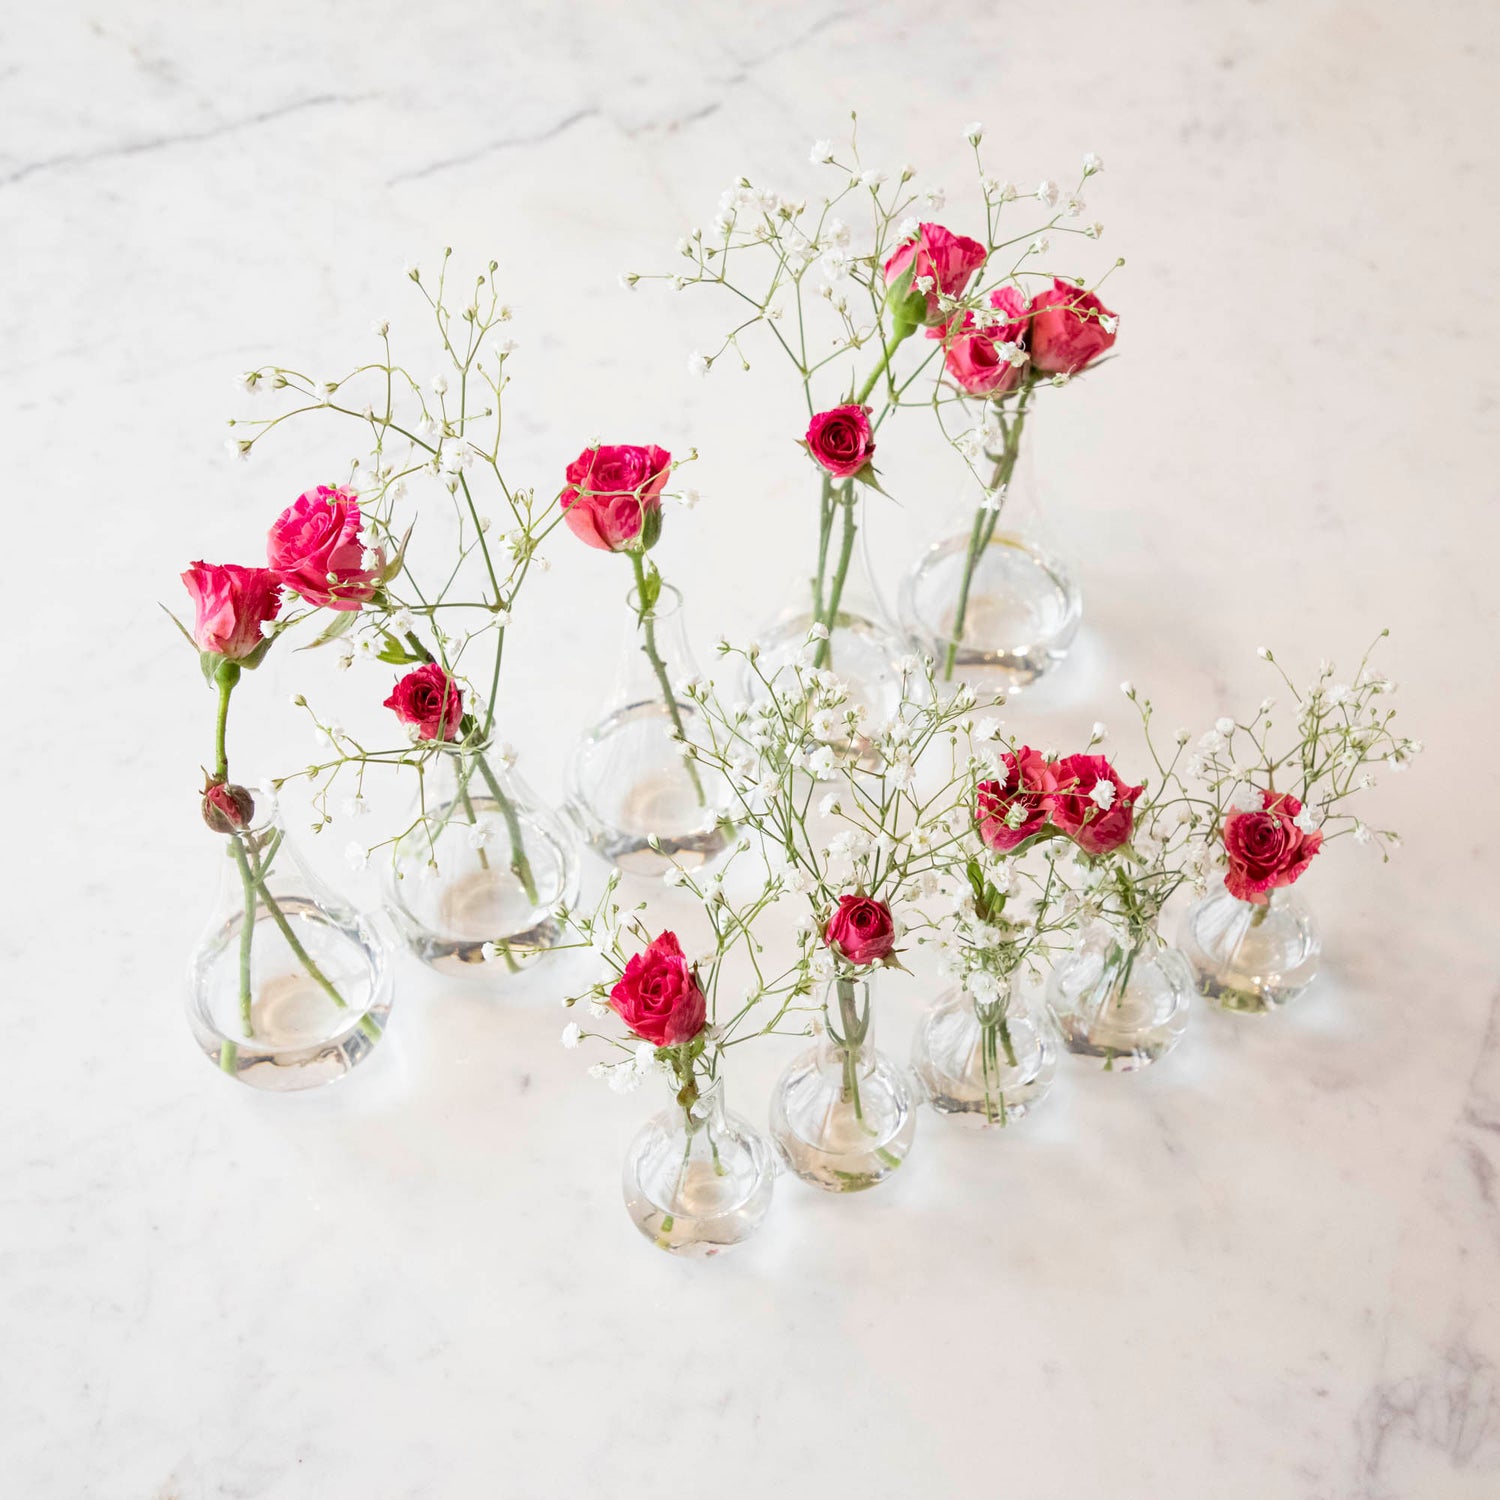 Five Quintet Glass Vases of varying shapes holding floral cuttings of pink roses and baby&